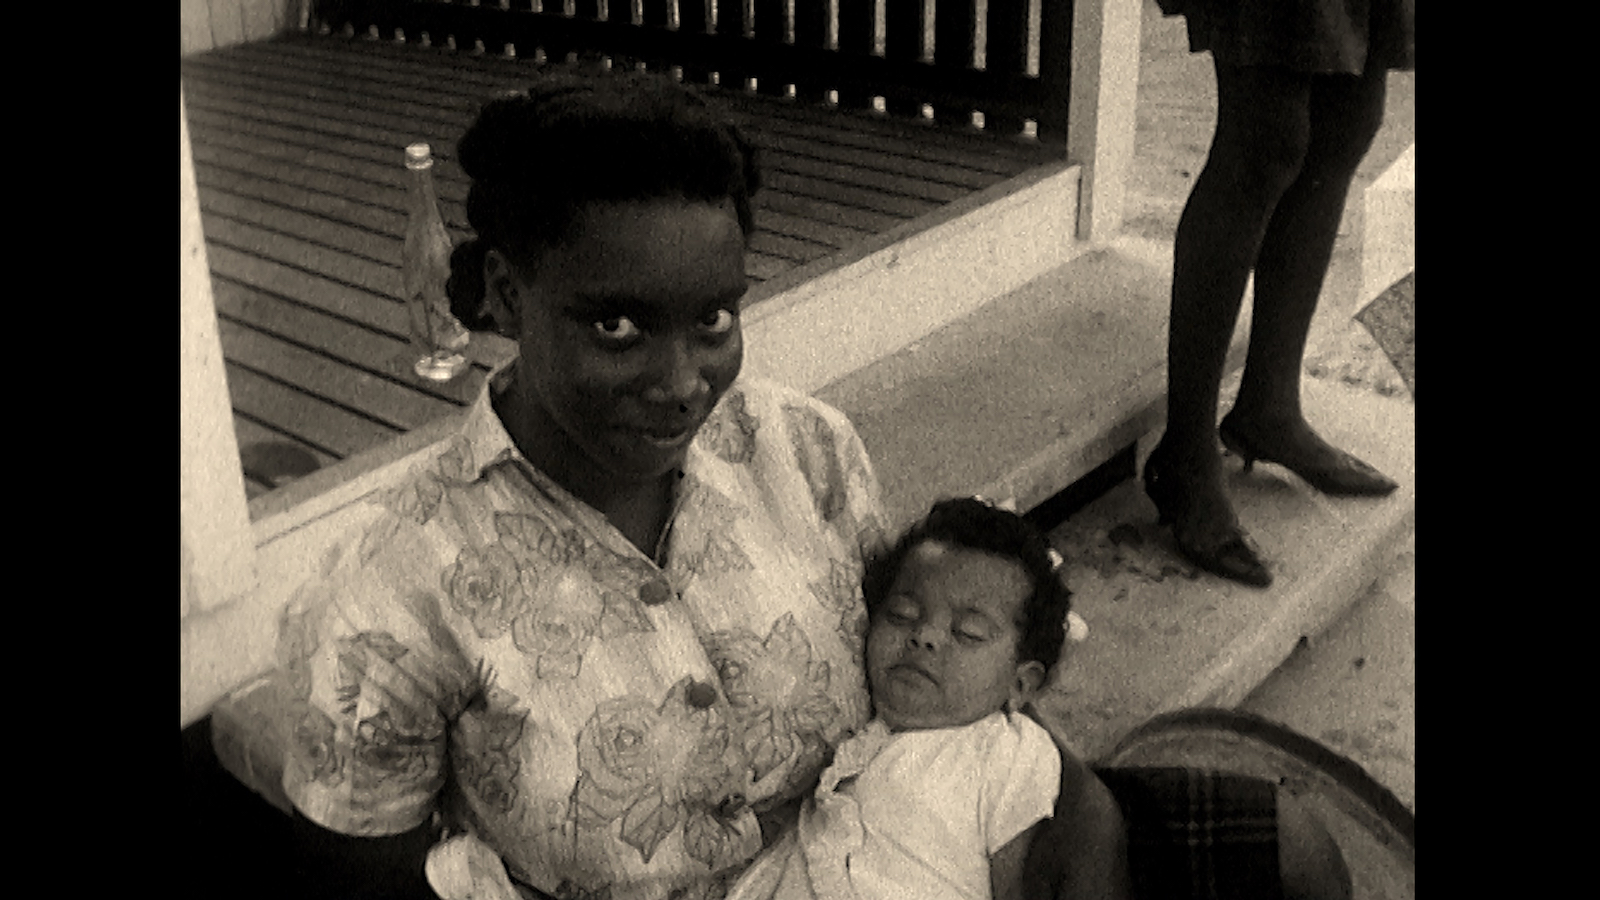 A smiling woman holds a baby and looks into the camera, in a black-and-white image